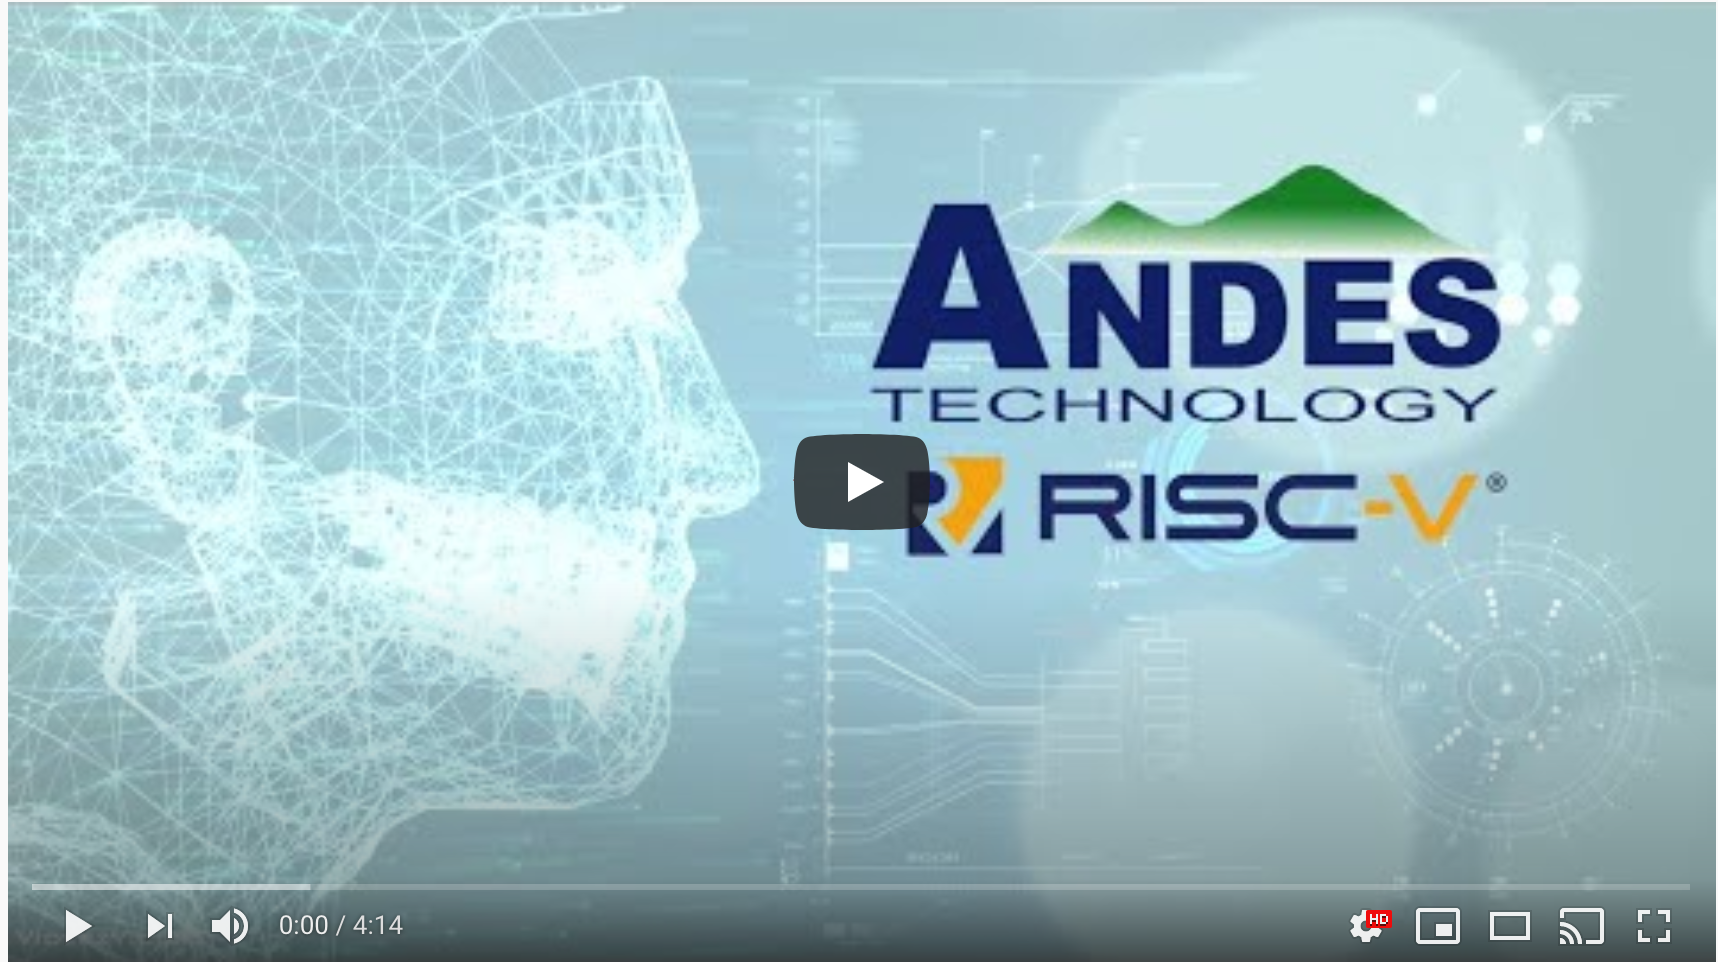 Andes Technology Driving Innovations | Andes Technology Corporation (YouTube)